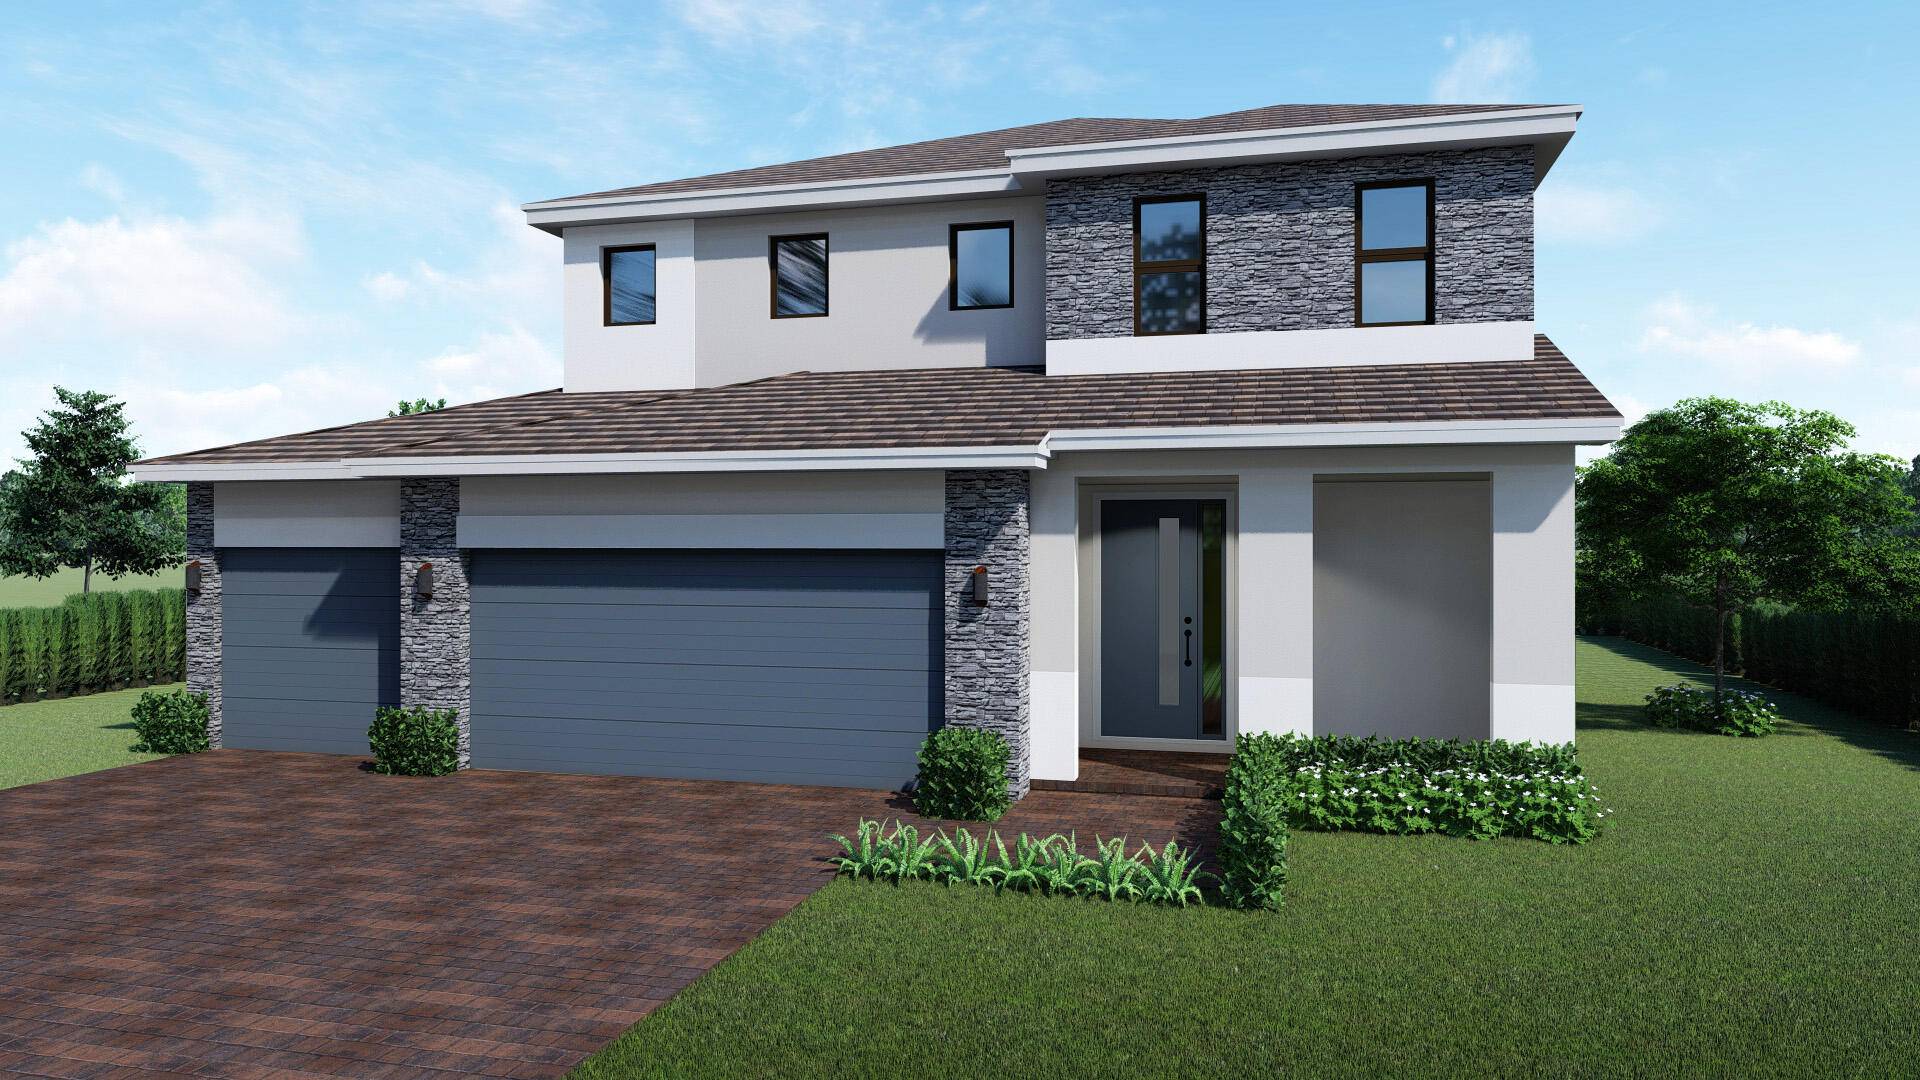 Stunning 2 story single family home with contemporary style stone accents on front.